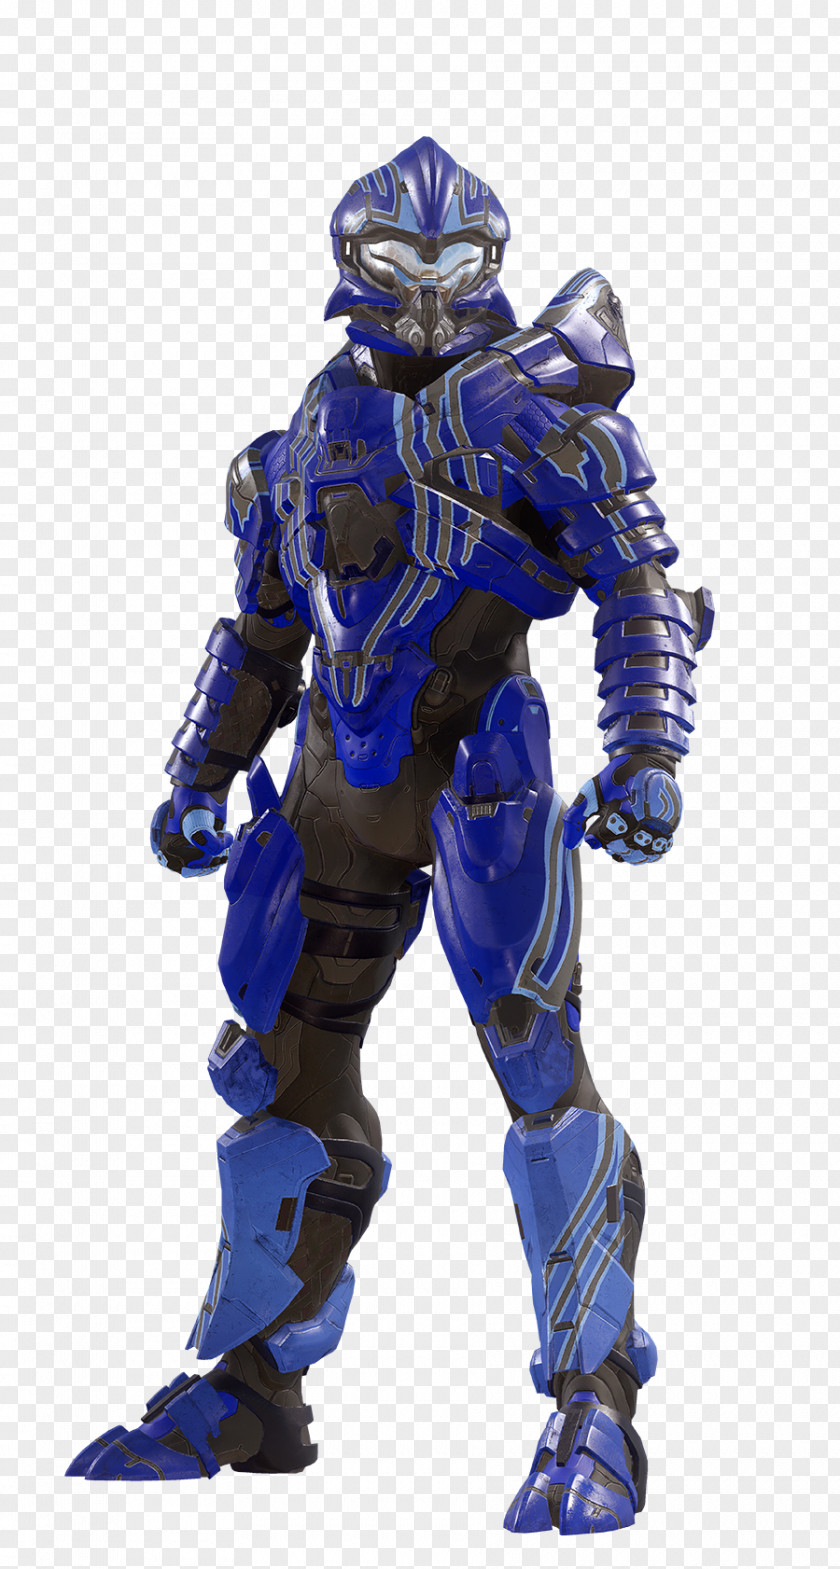 Halo 5: Guardians Halo: Reach Master Chief 4 Spartan Assault PNG